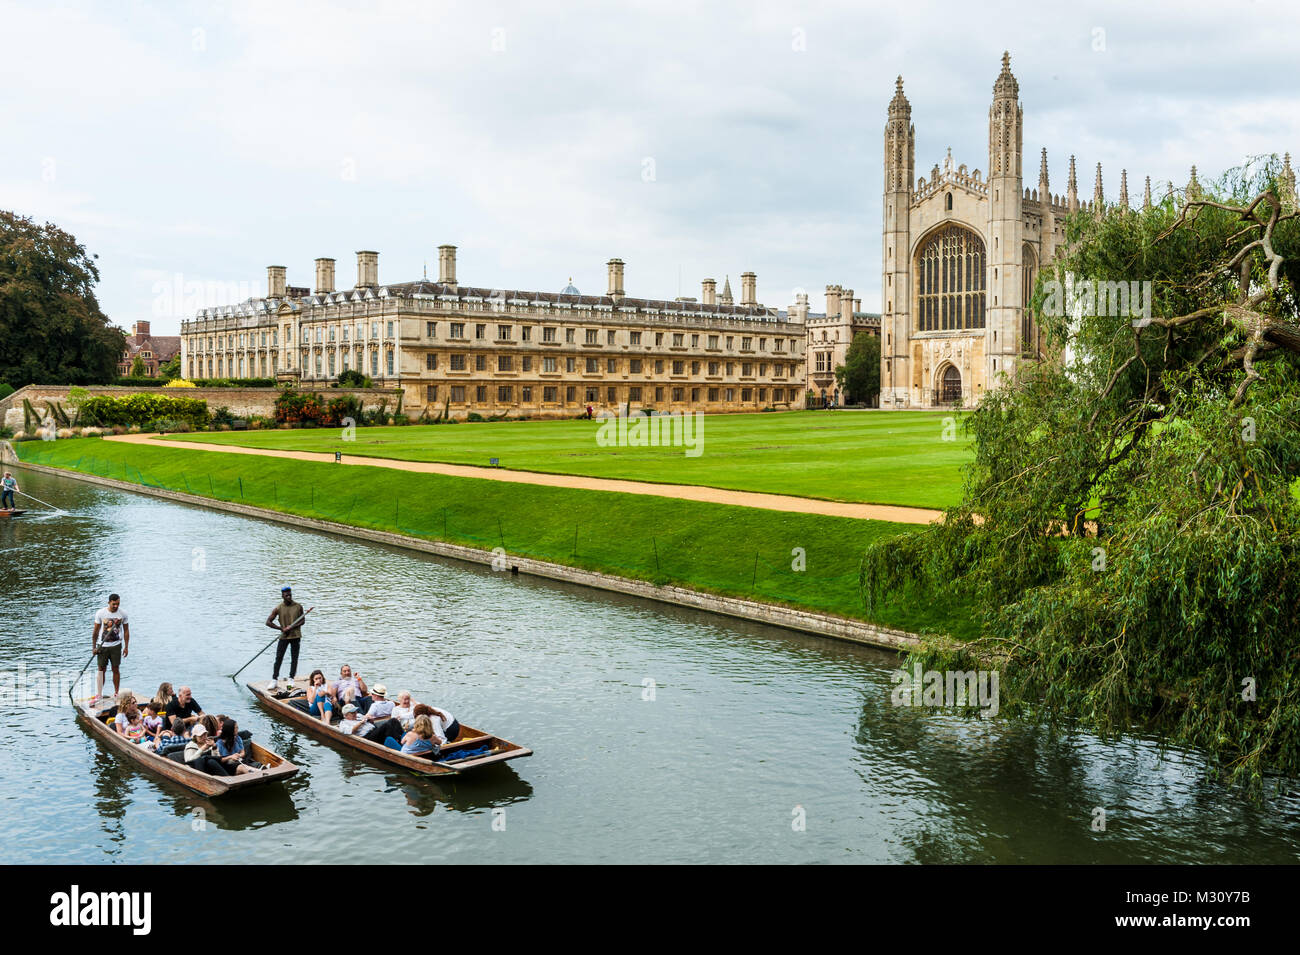 Cambridge, UK -August 2017. King's College and King's College Chapel view from The Backs with the River Cam passing through and 2 punting boats with t Stock Photo